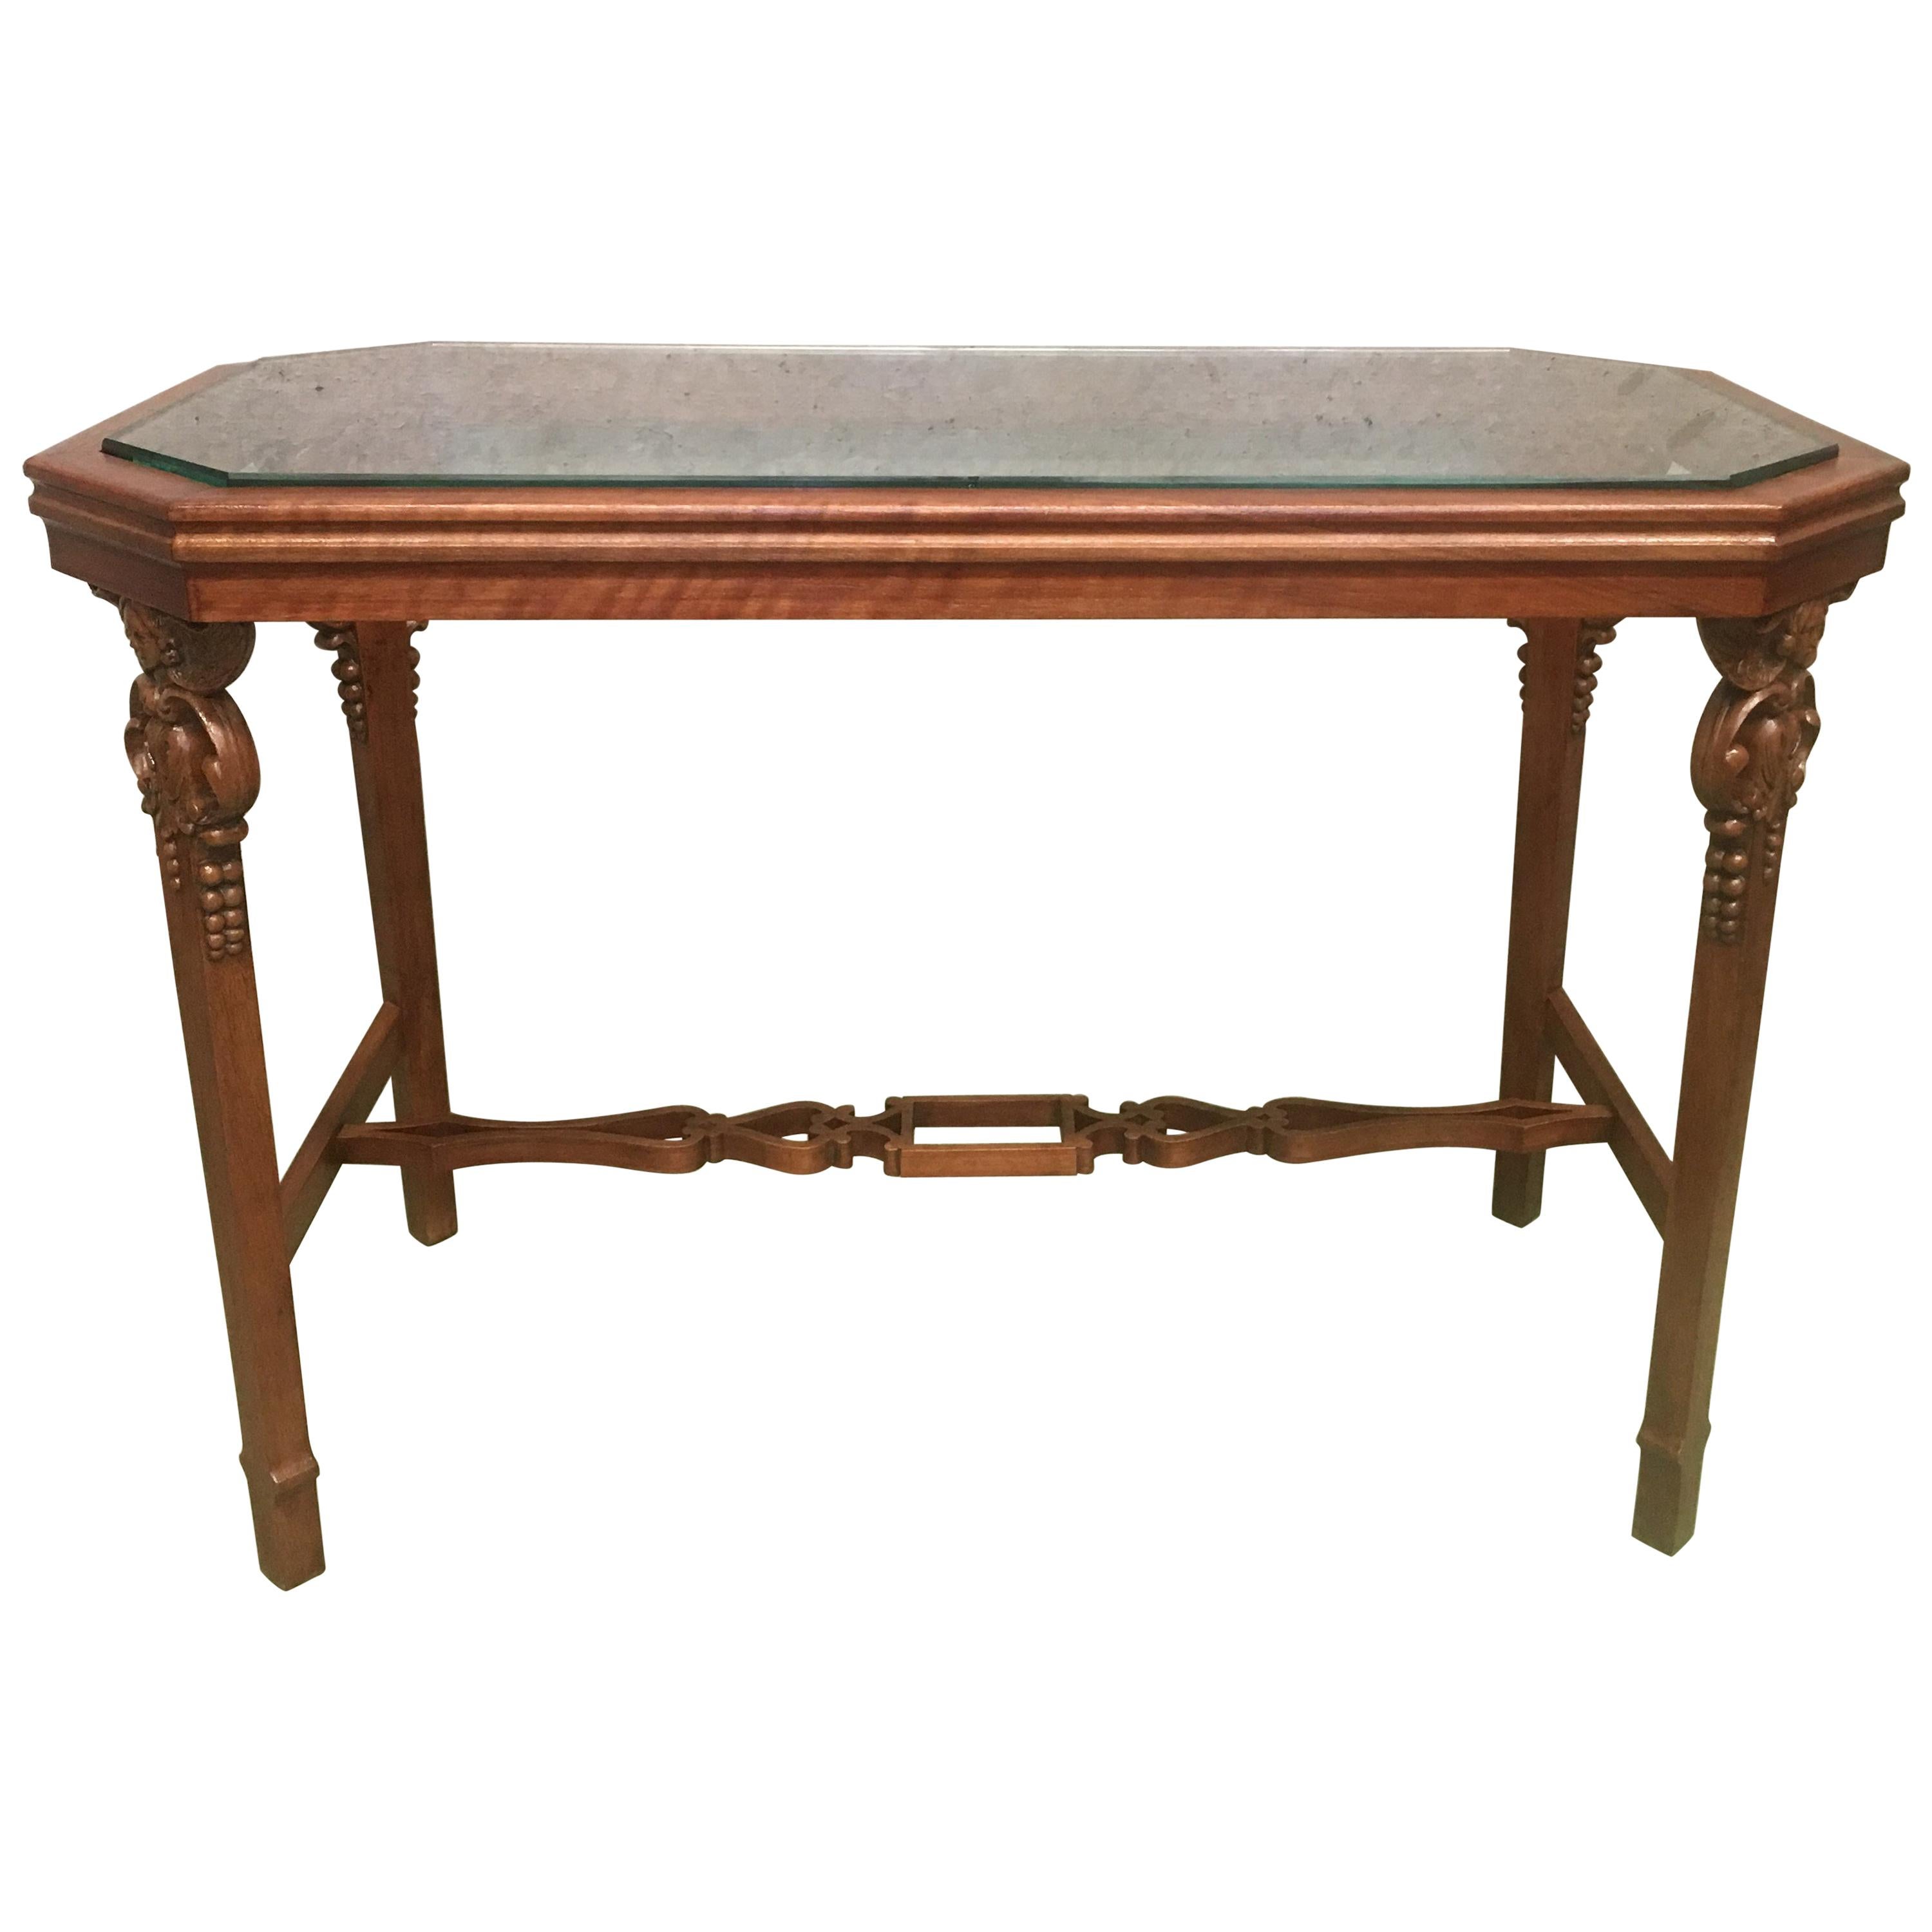 19th Century English Arts & Crafts Elm and Burl Carved Side Table, Glass Top